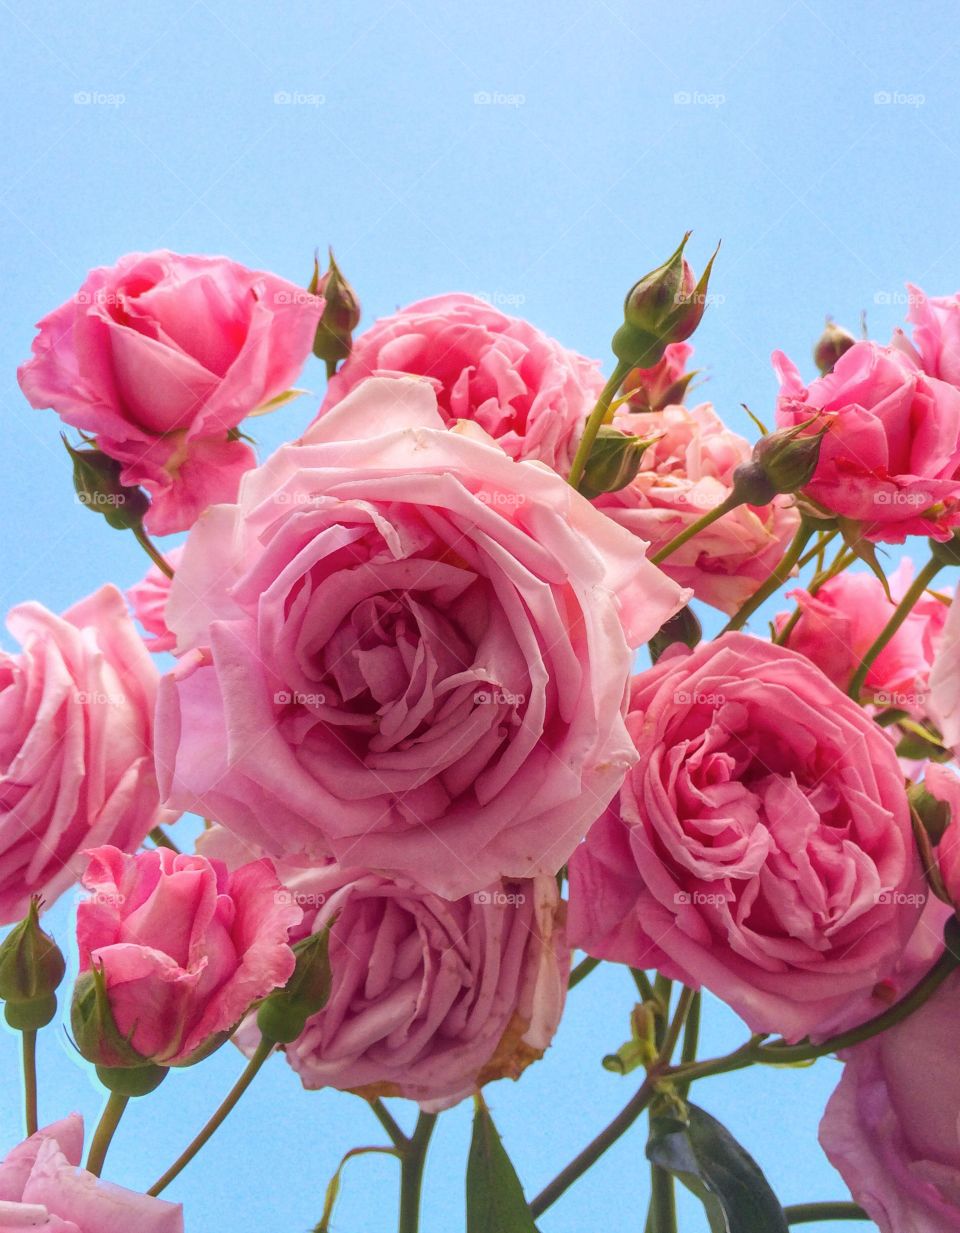 Pink roses against clear sky